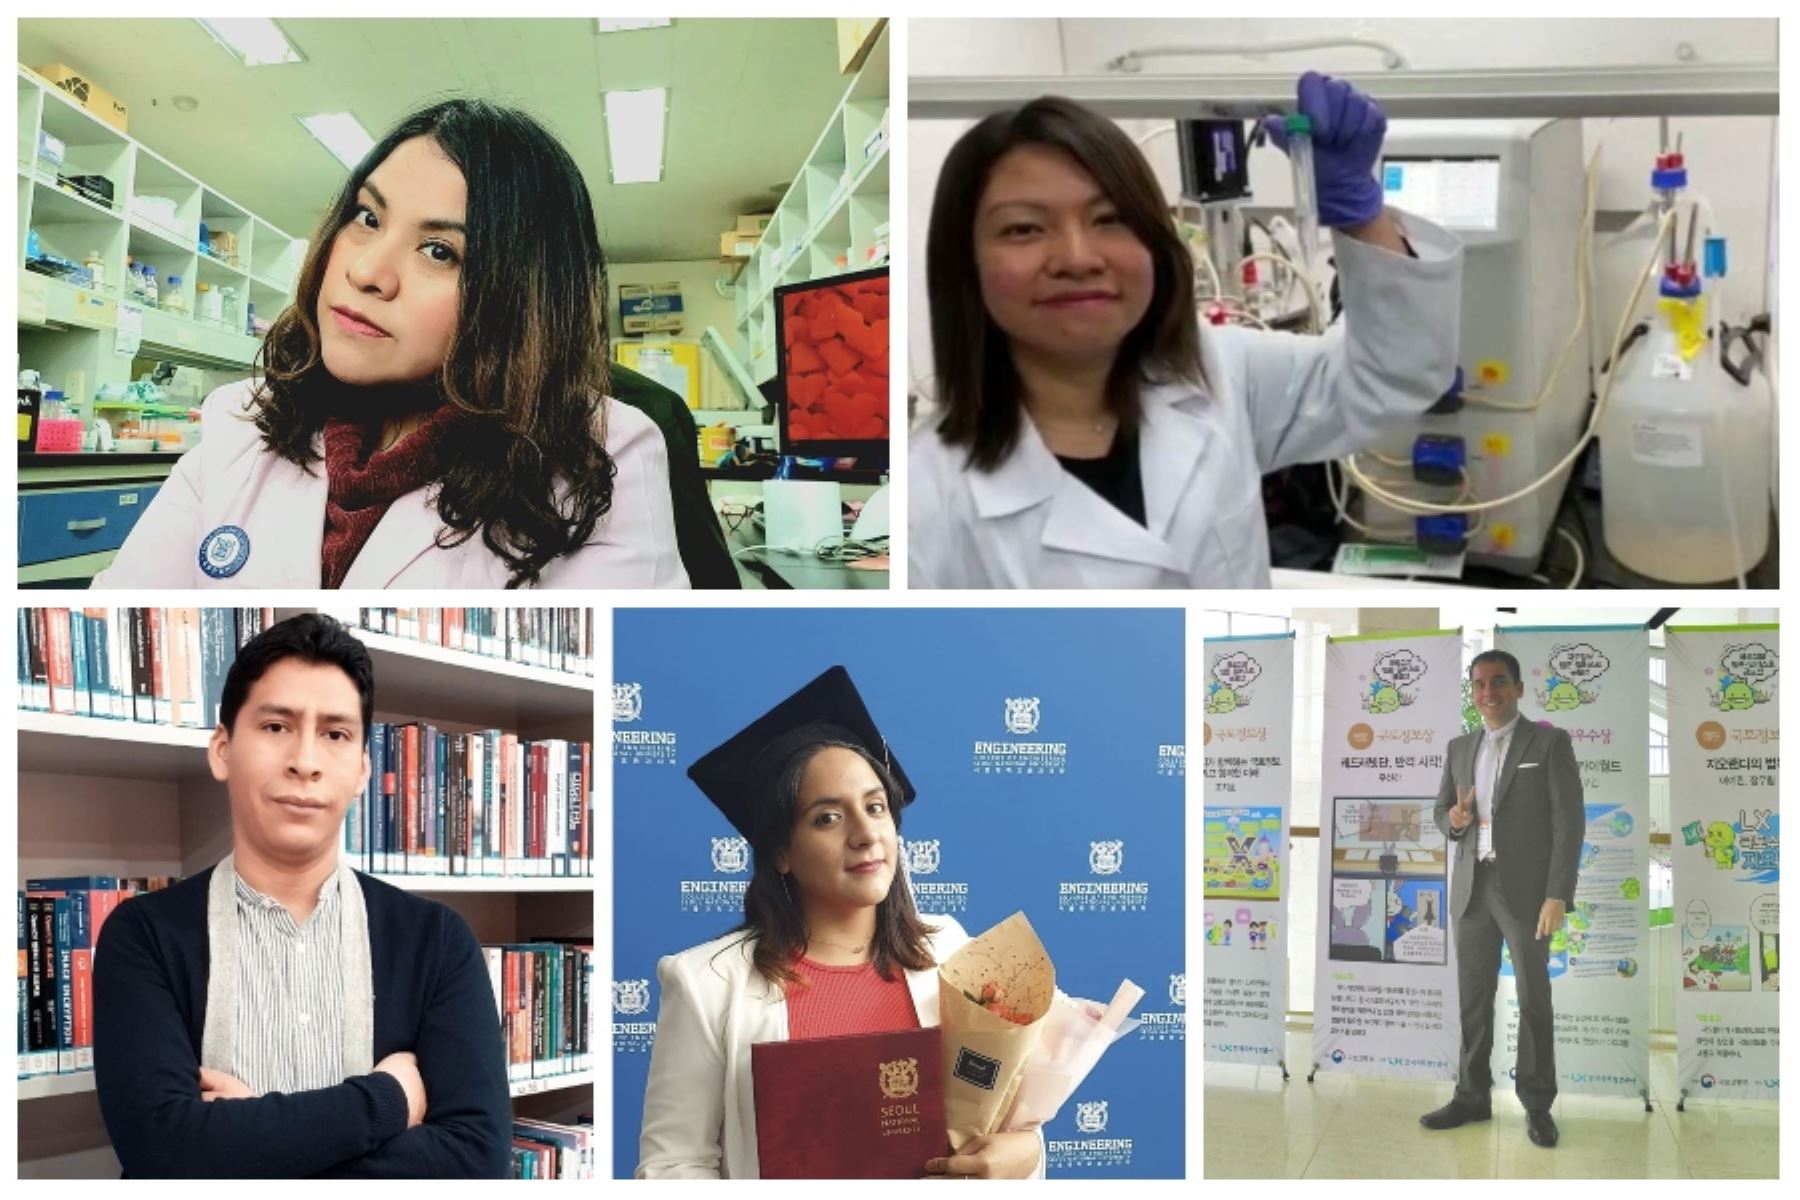 Peruvian researchers distinguished in science and technology in South Korea |  News